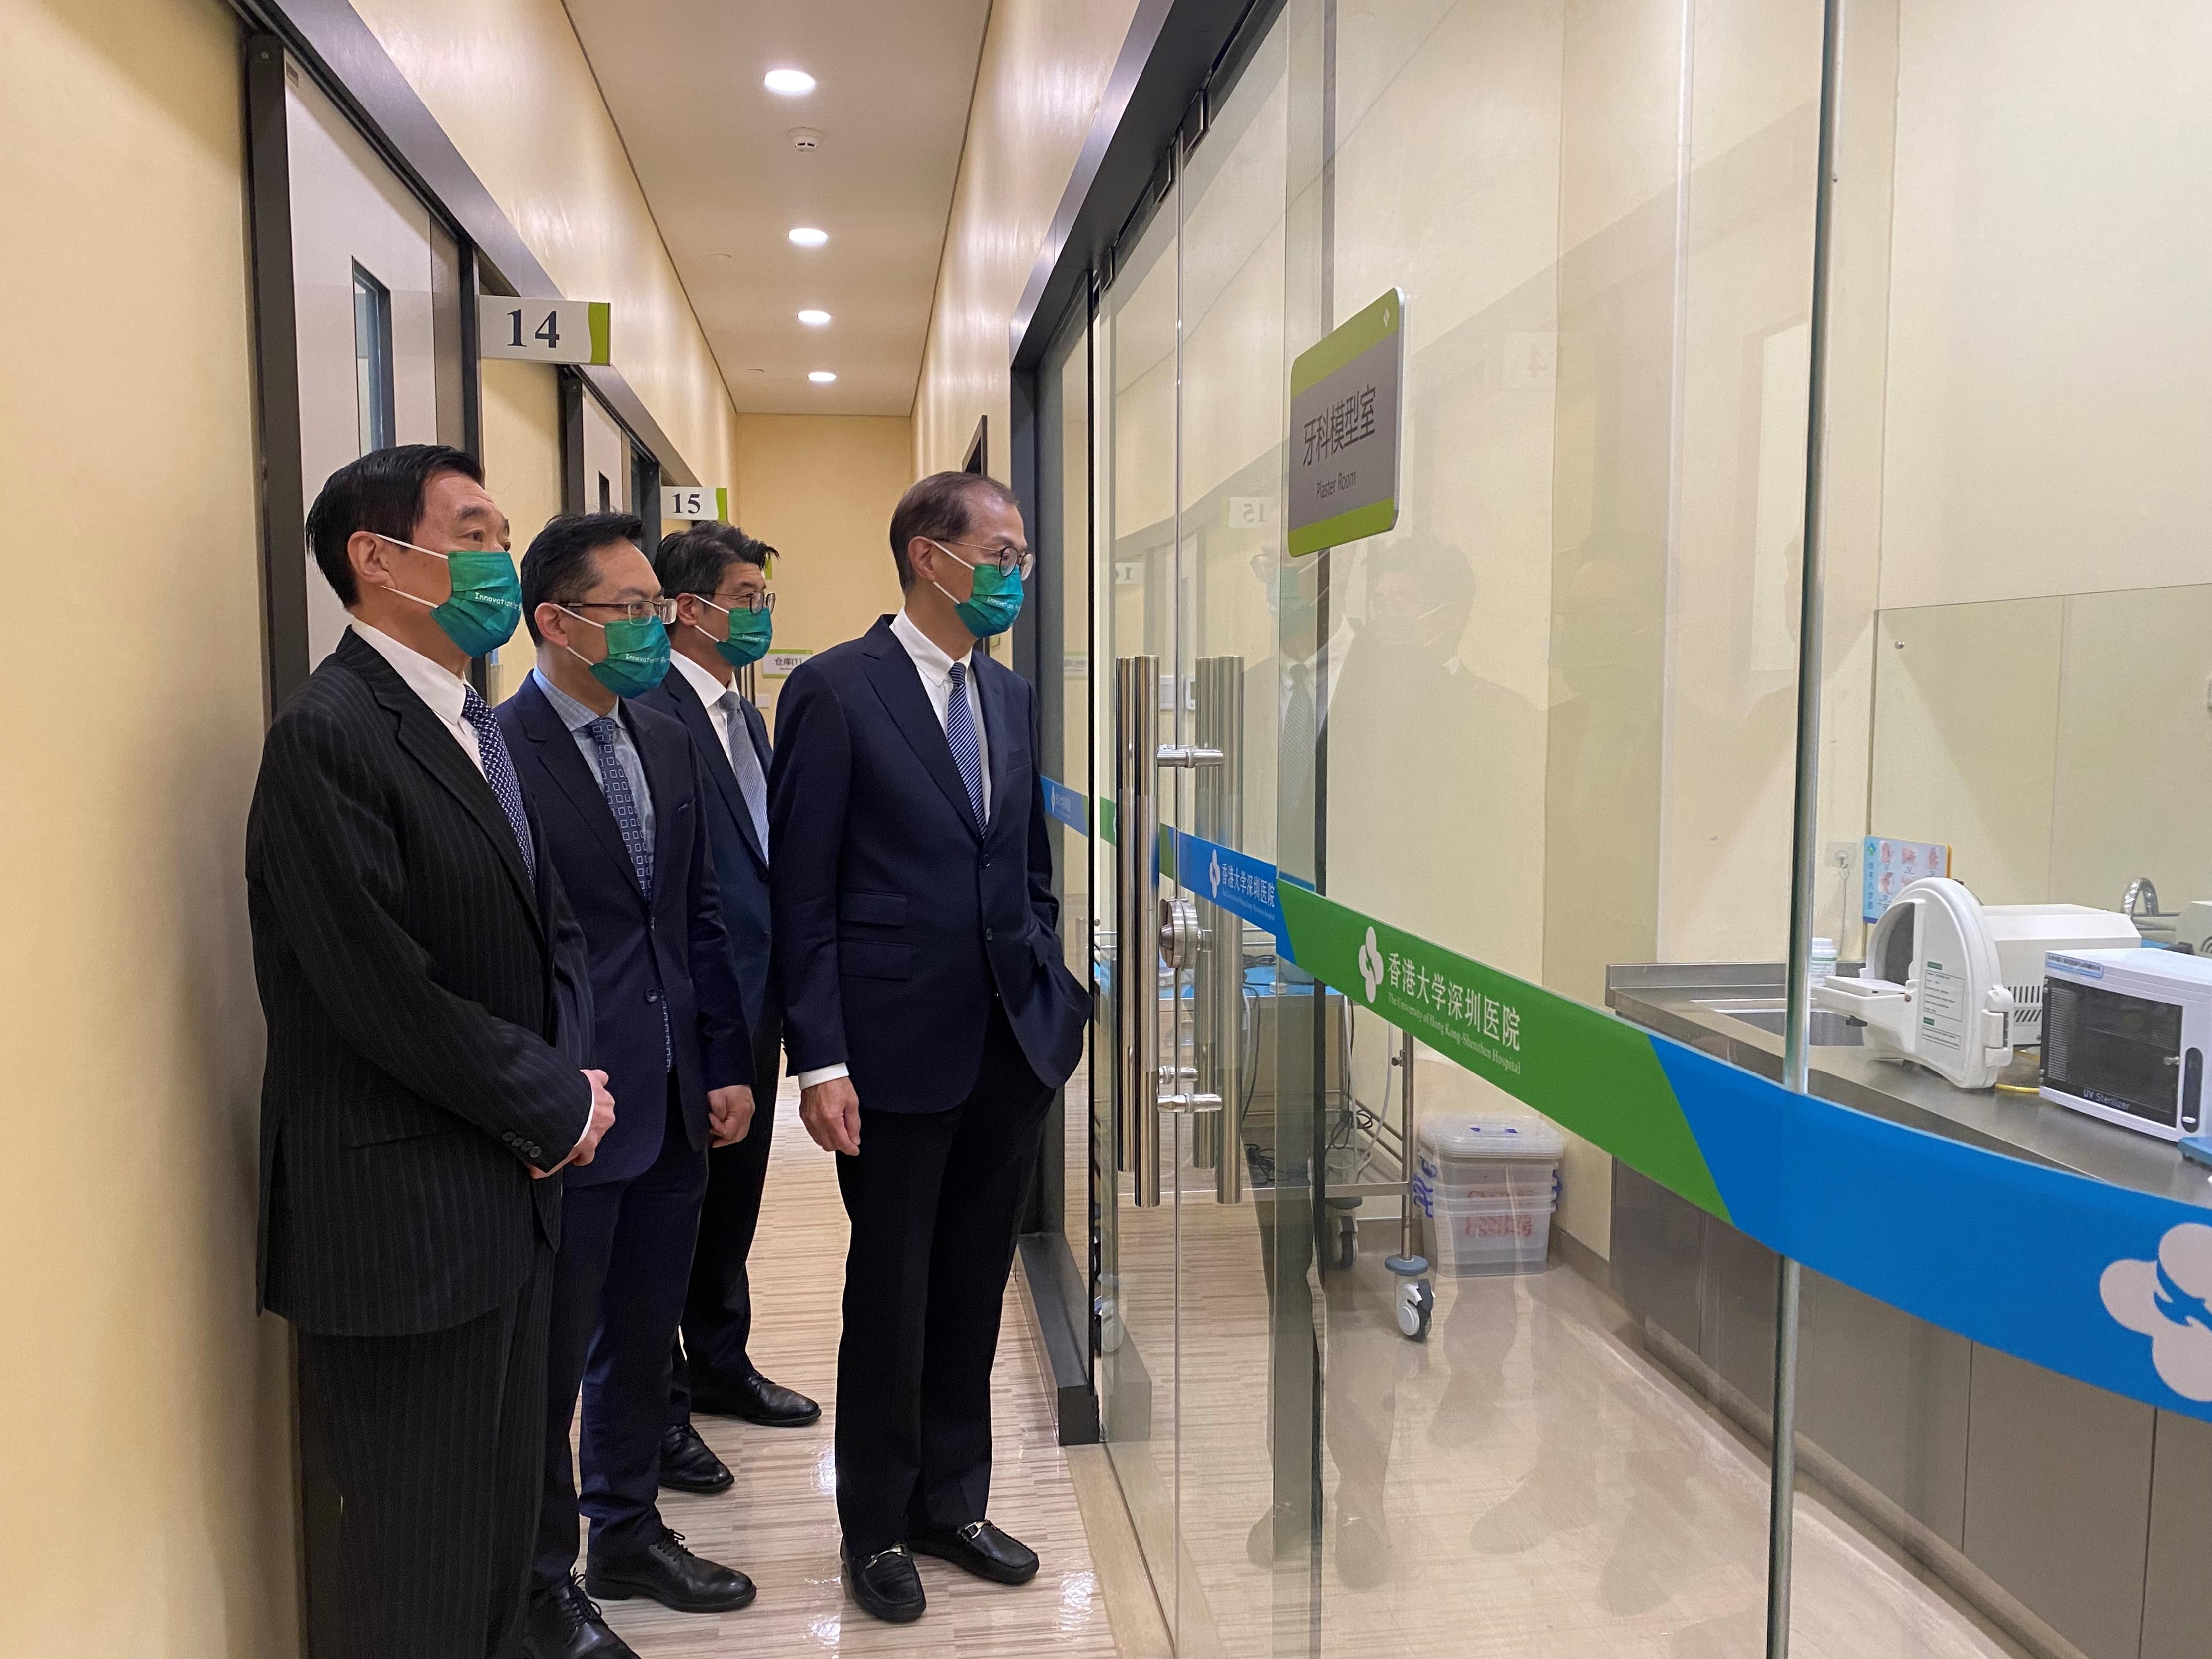 The Secretary for Health, Professor Lo Chung-mau (first right); the Director of Health, Dr Ronald Lam (second left); the Commissioner for Primary Healthcare, Dr Pang Fei-chau (second right); and the Chairman of the Hospital Authority, Mr Henry Fan (first left), toured the Huawei Li Zhi Yuan Community Health Service Center of the University of Hong Kong - Shenzhen Hospital this morning (March 31).